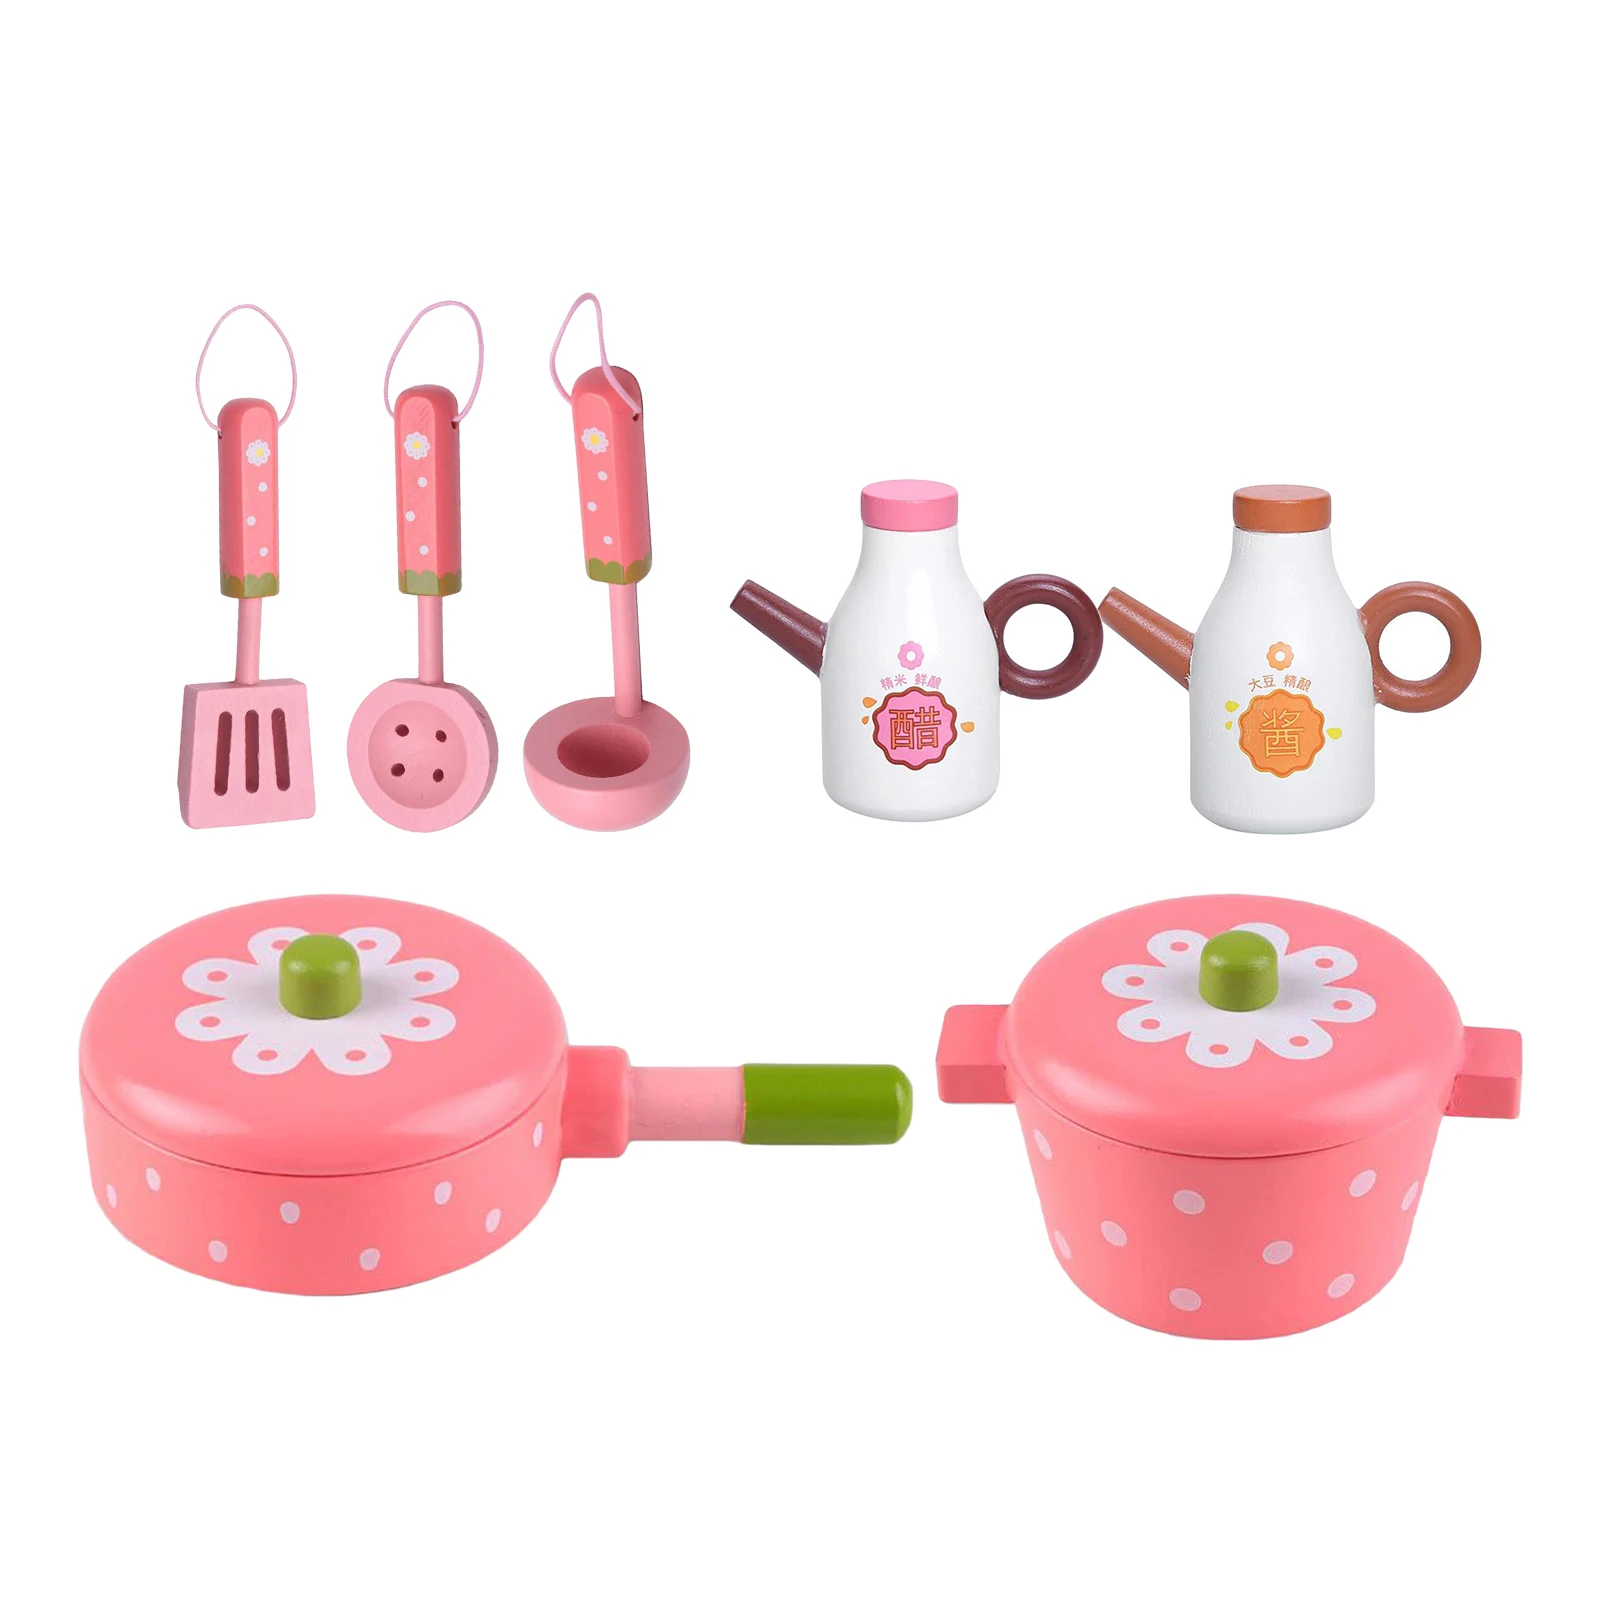 7PCS/Set Mini Kitchen Toys Pretend Cooking Pink Wooden Cookware Pot Pan Miniature Utensils Role Playing Learning Kitchen Toy